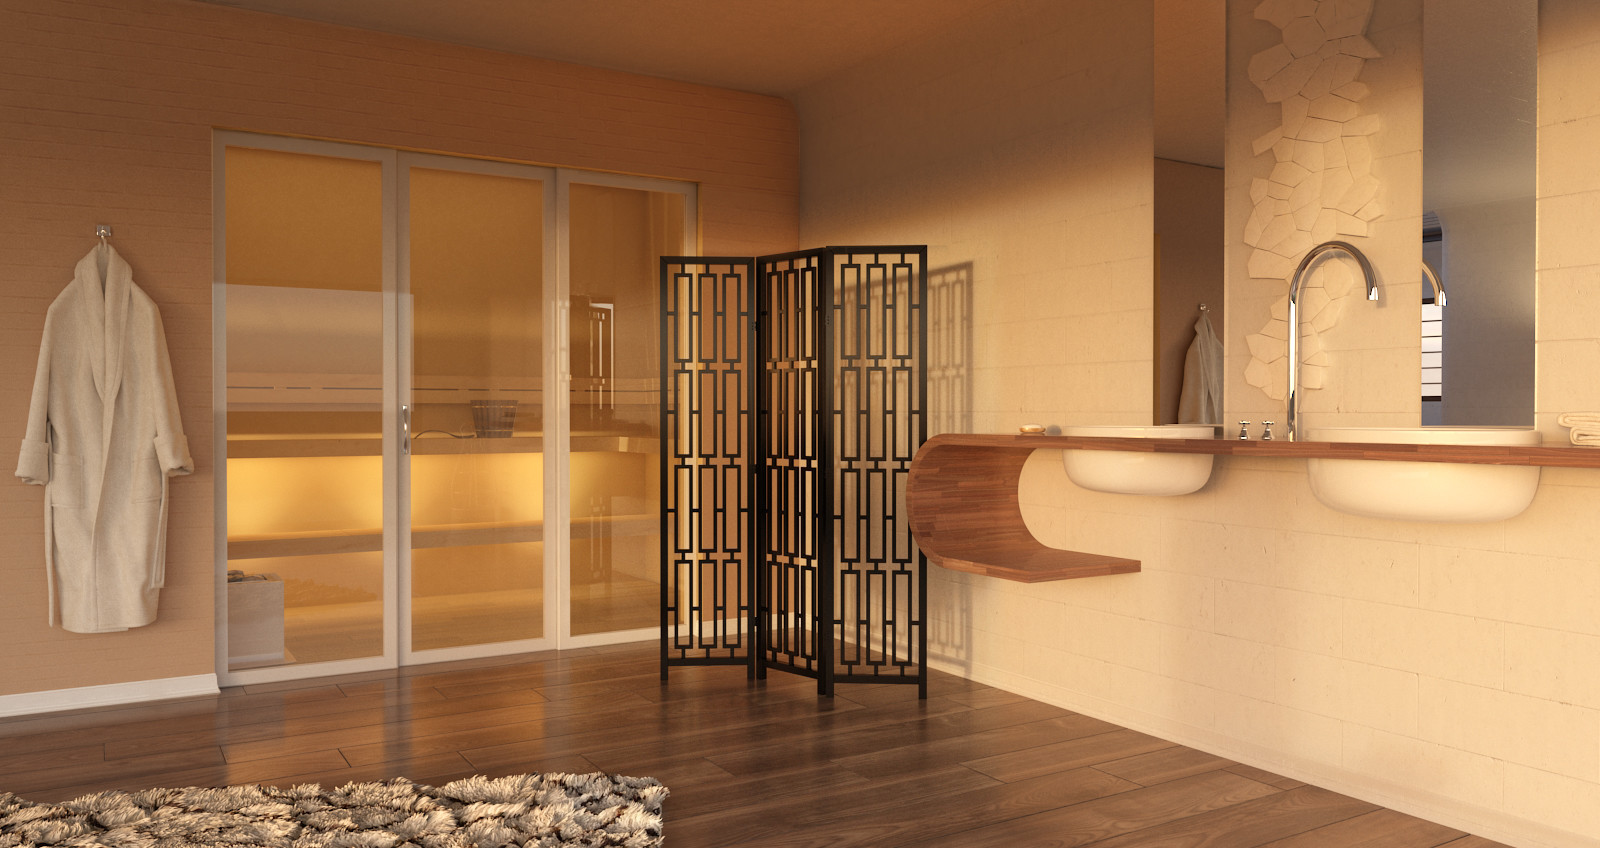 3d Base - Rendered with Vray in 3ds Max